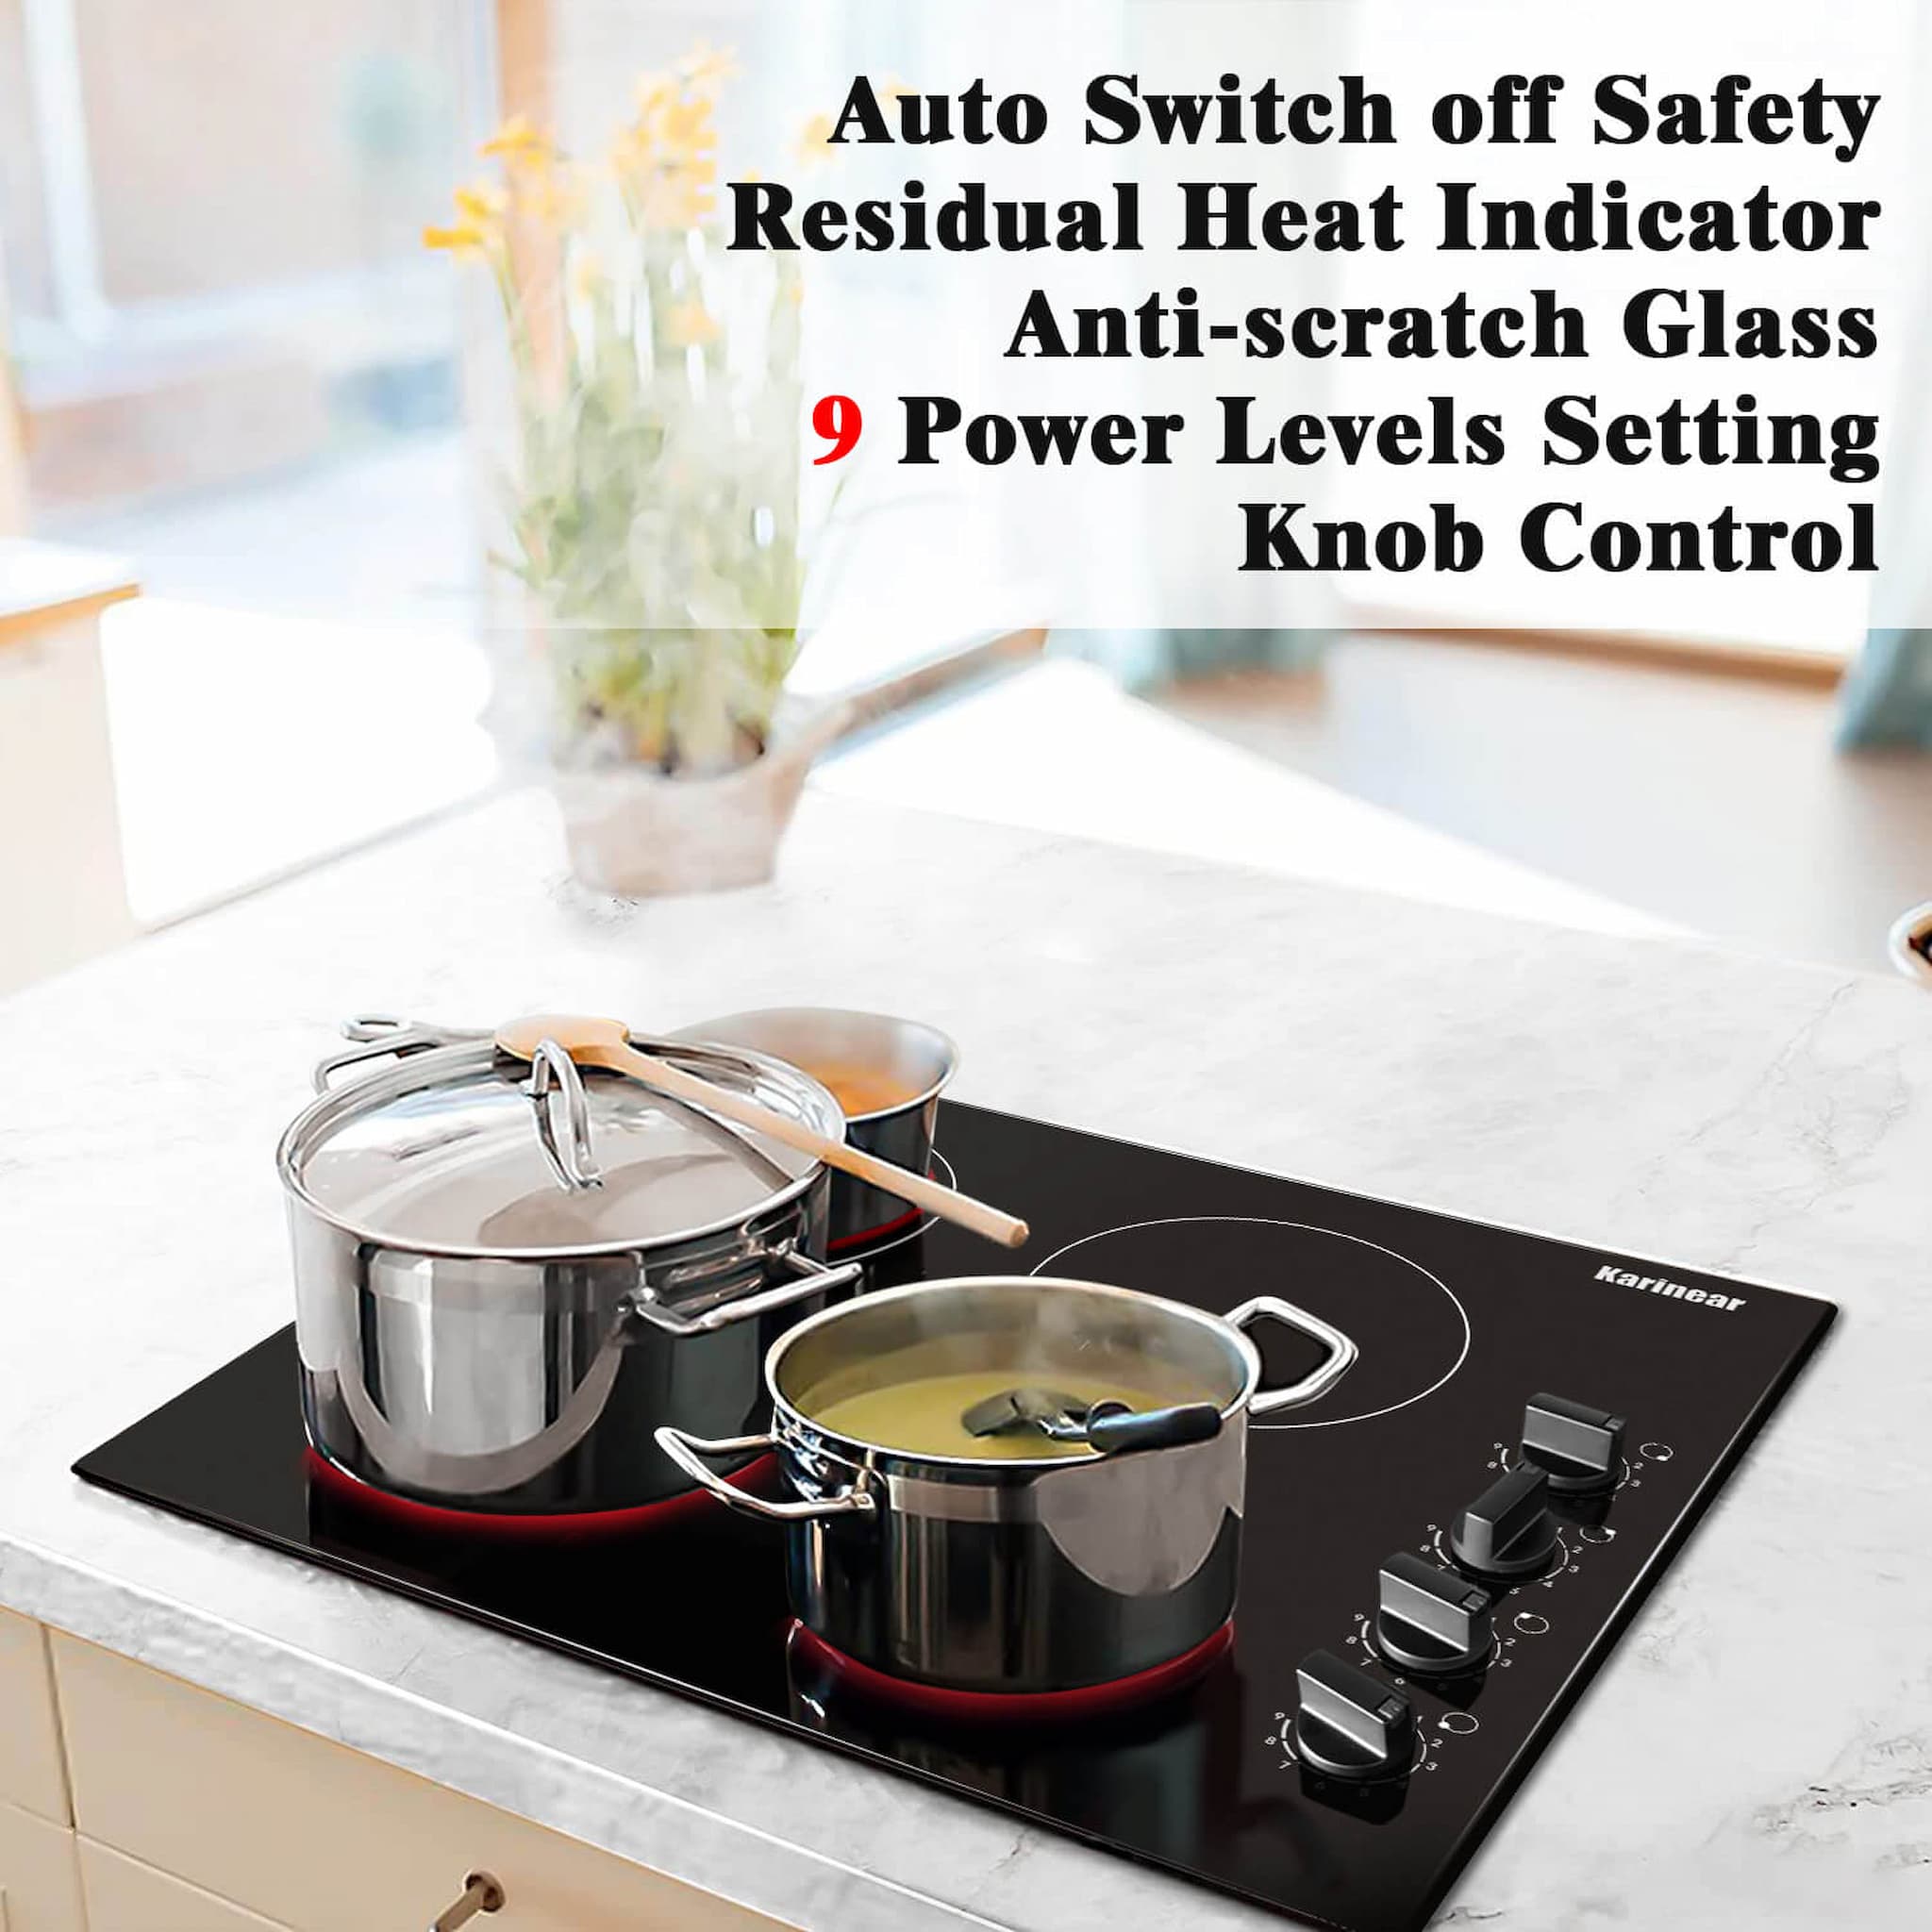 220-240v Electric Radiant Cooktop with Knob Control, Residual Heat Indicator, Over-Temperature Protection, Hard Wire(No Plug)